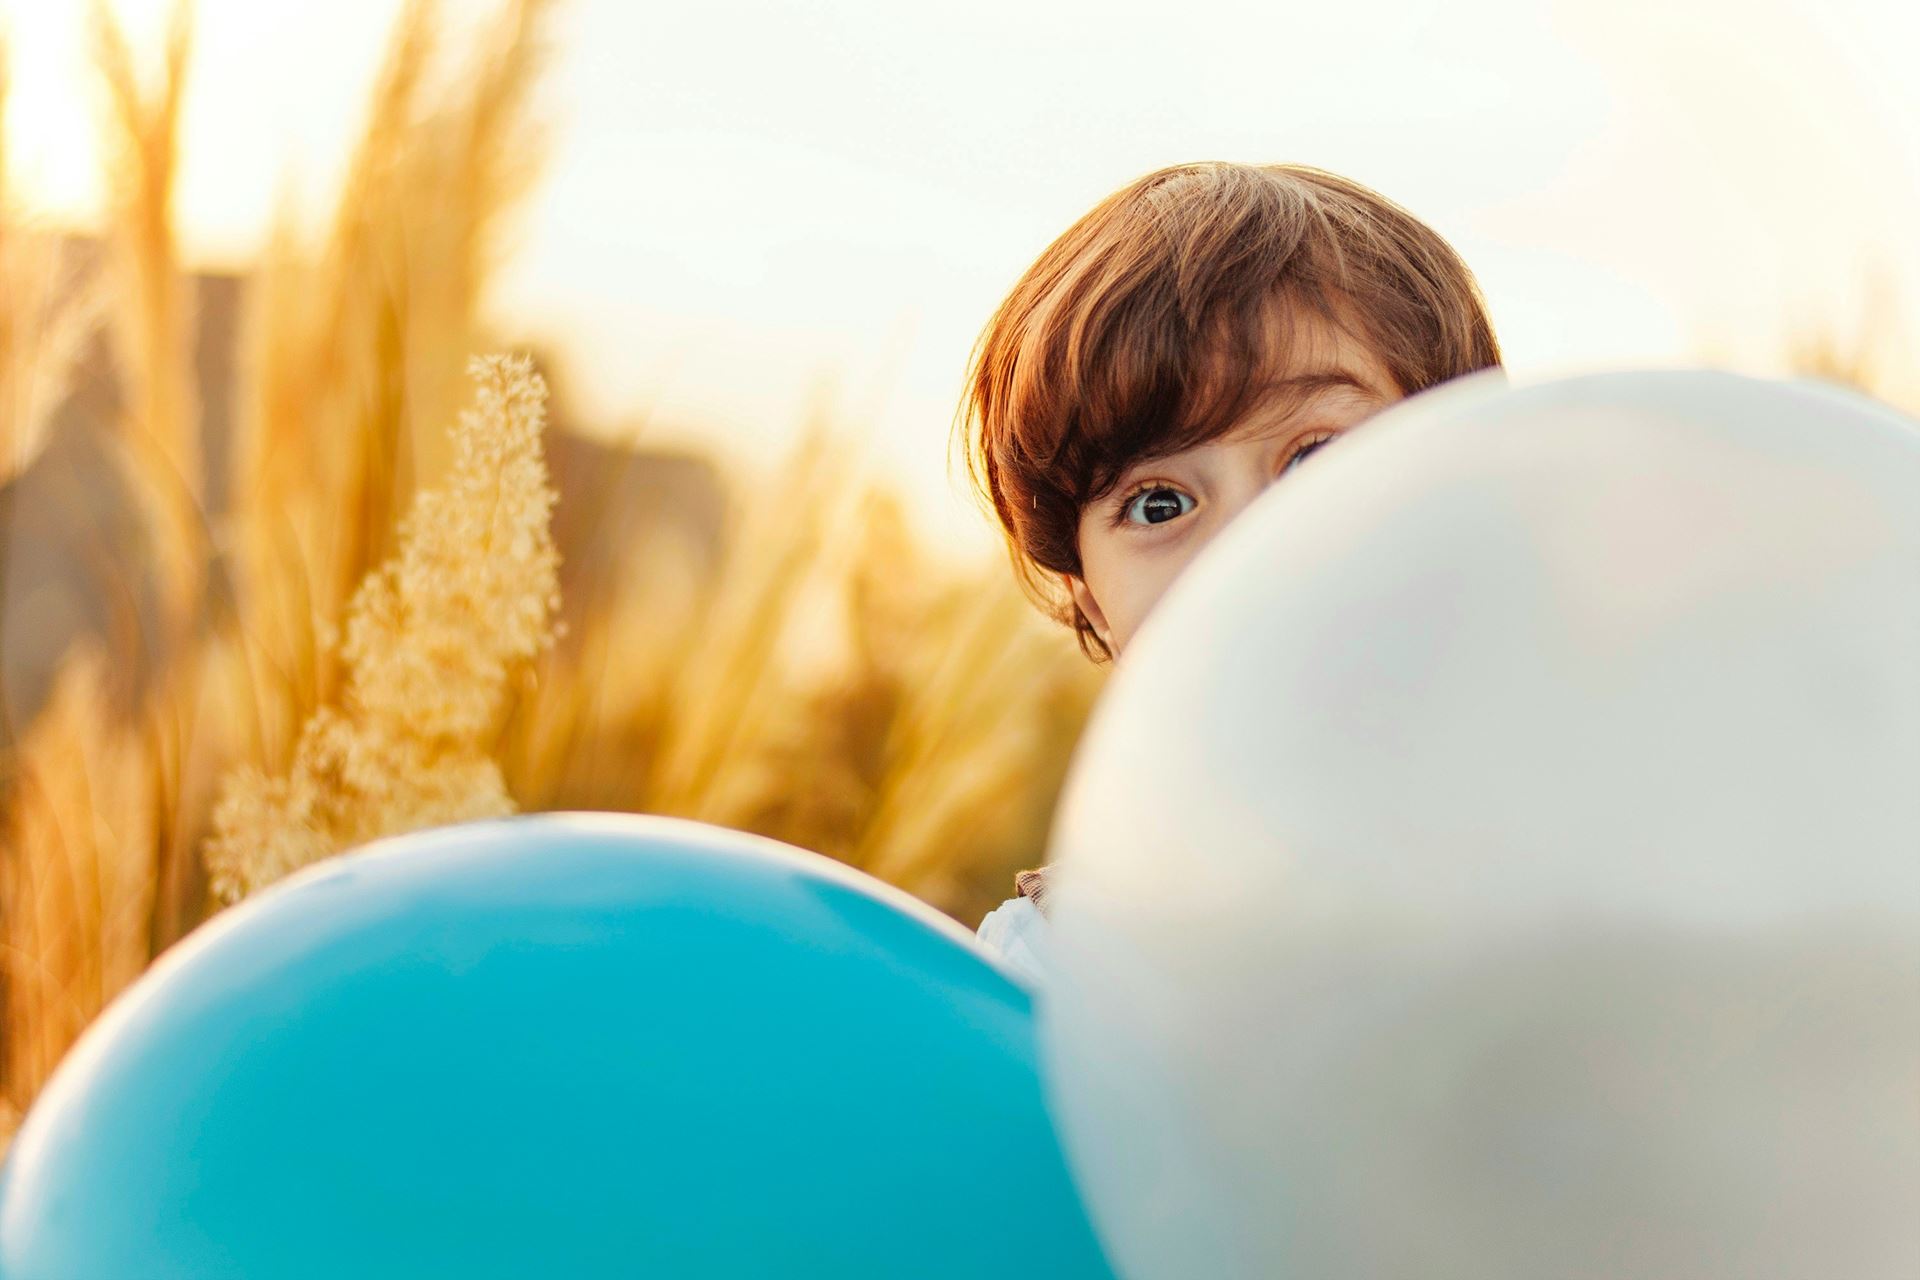 a child peeking out from behind a balloon